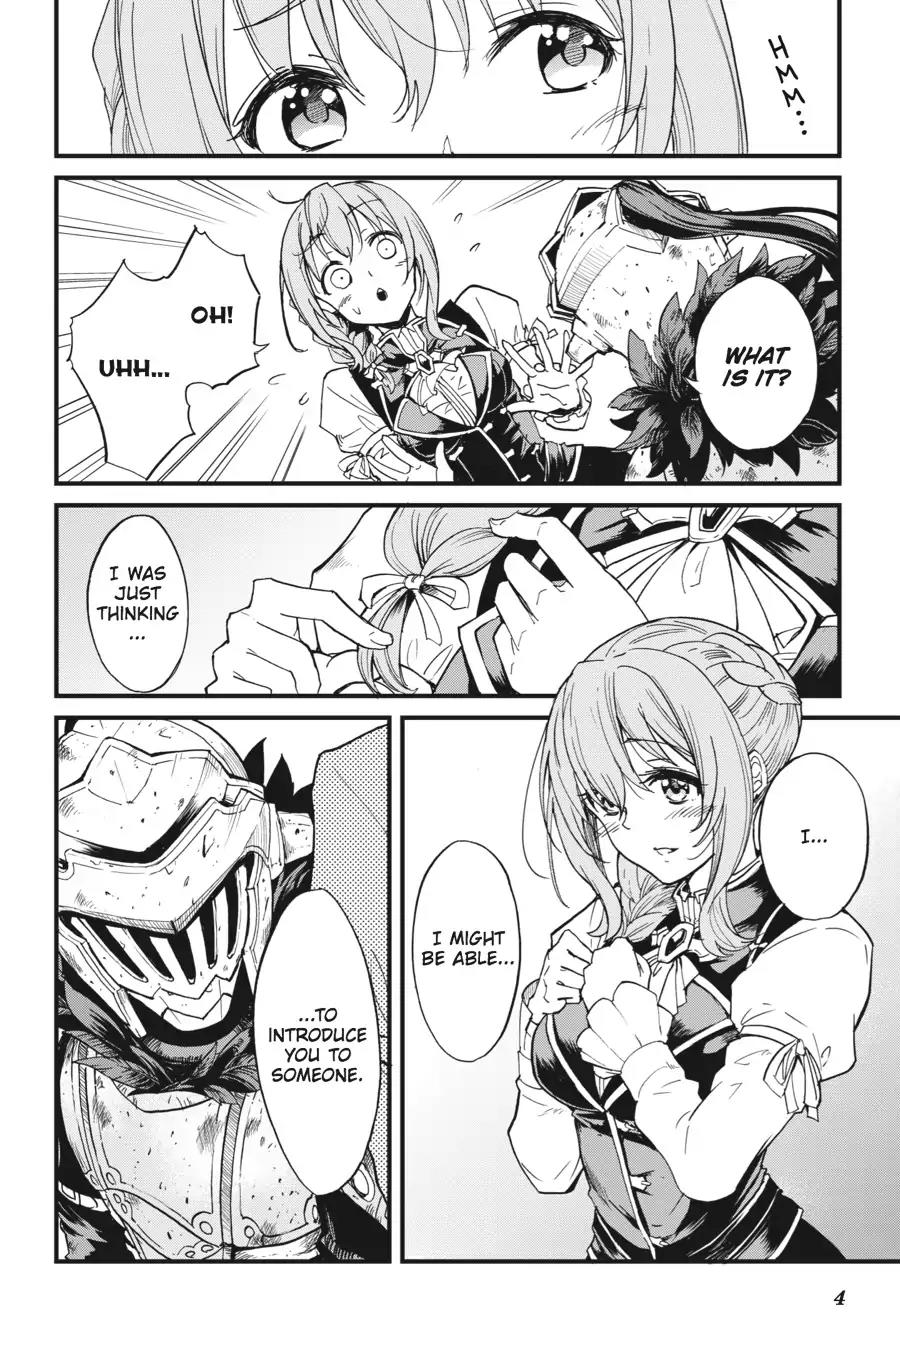 Goblin Slayer: Side Story Year One Vol.1 Chapter 22.5